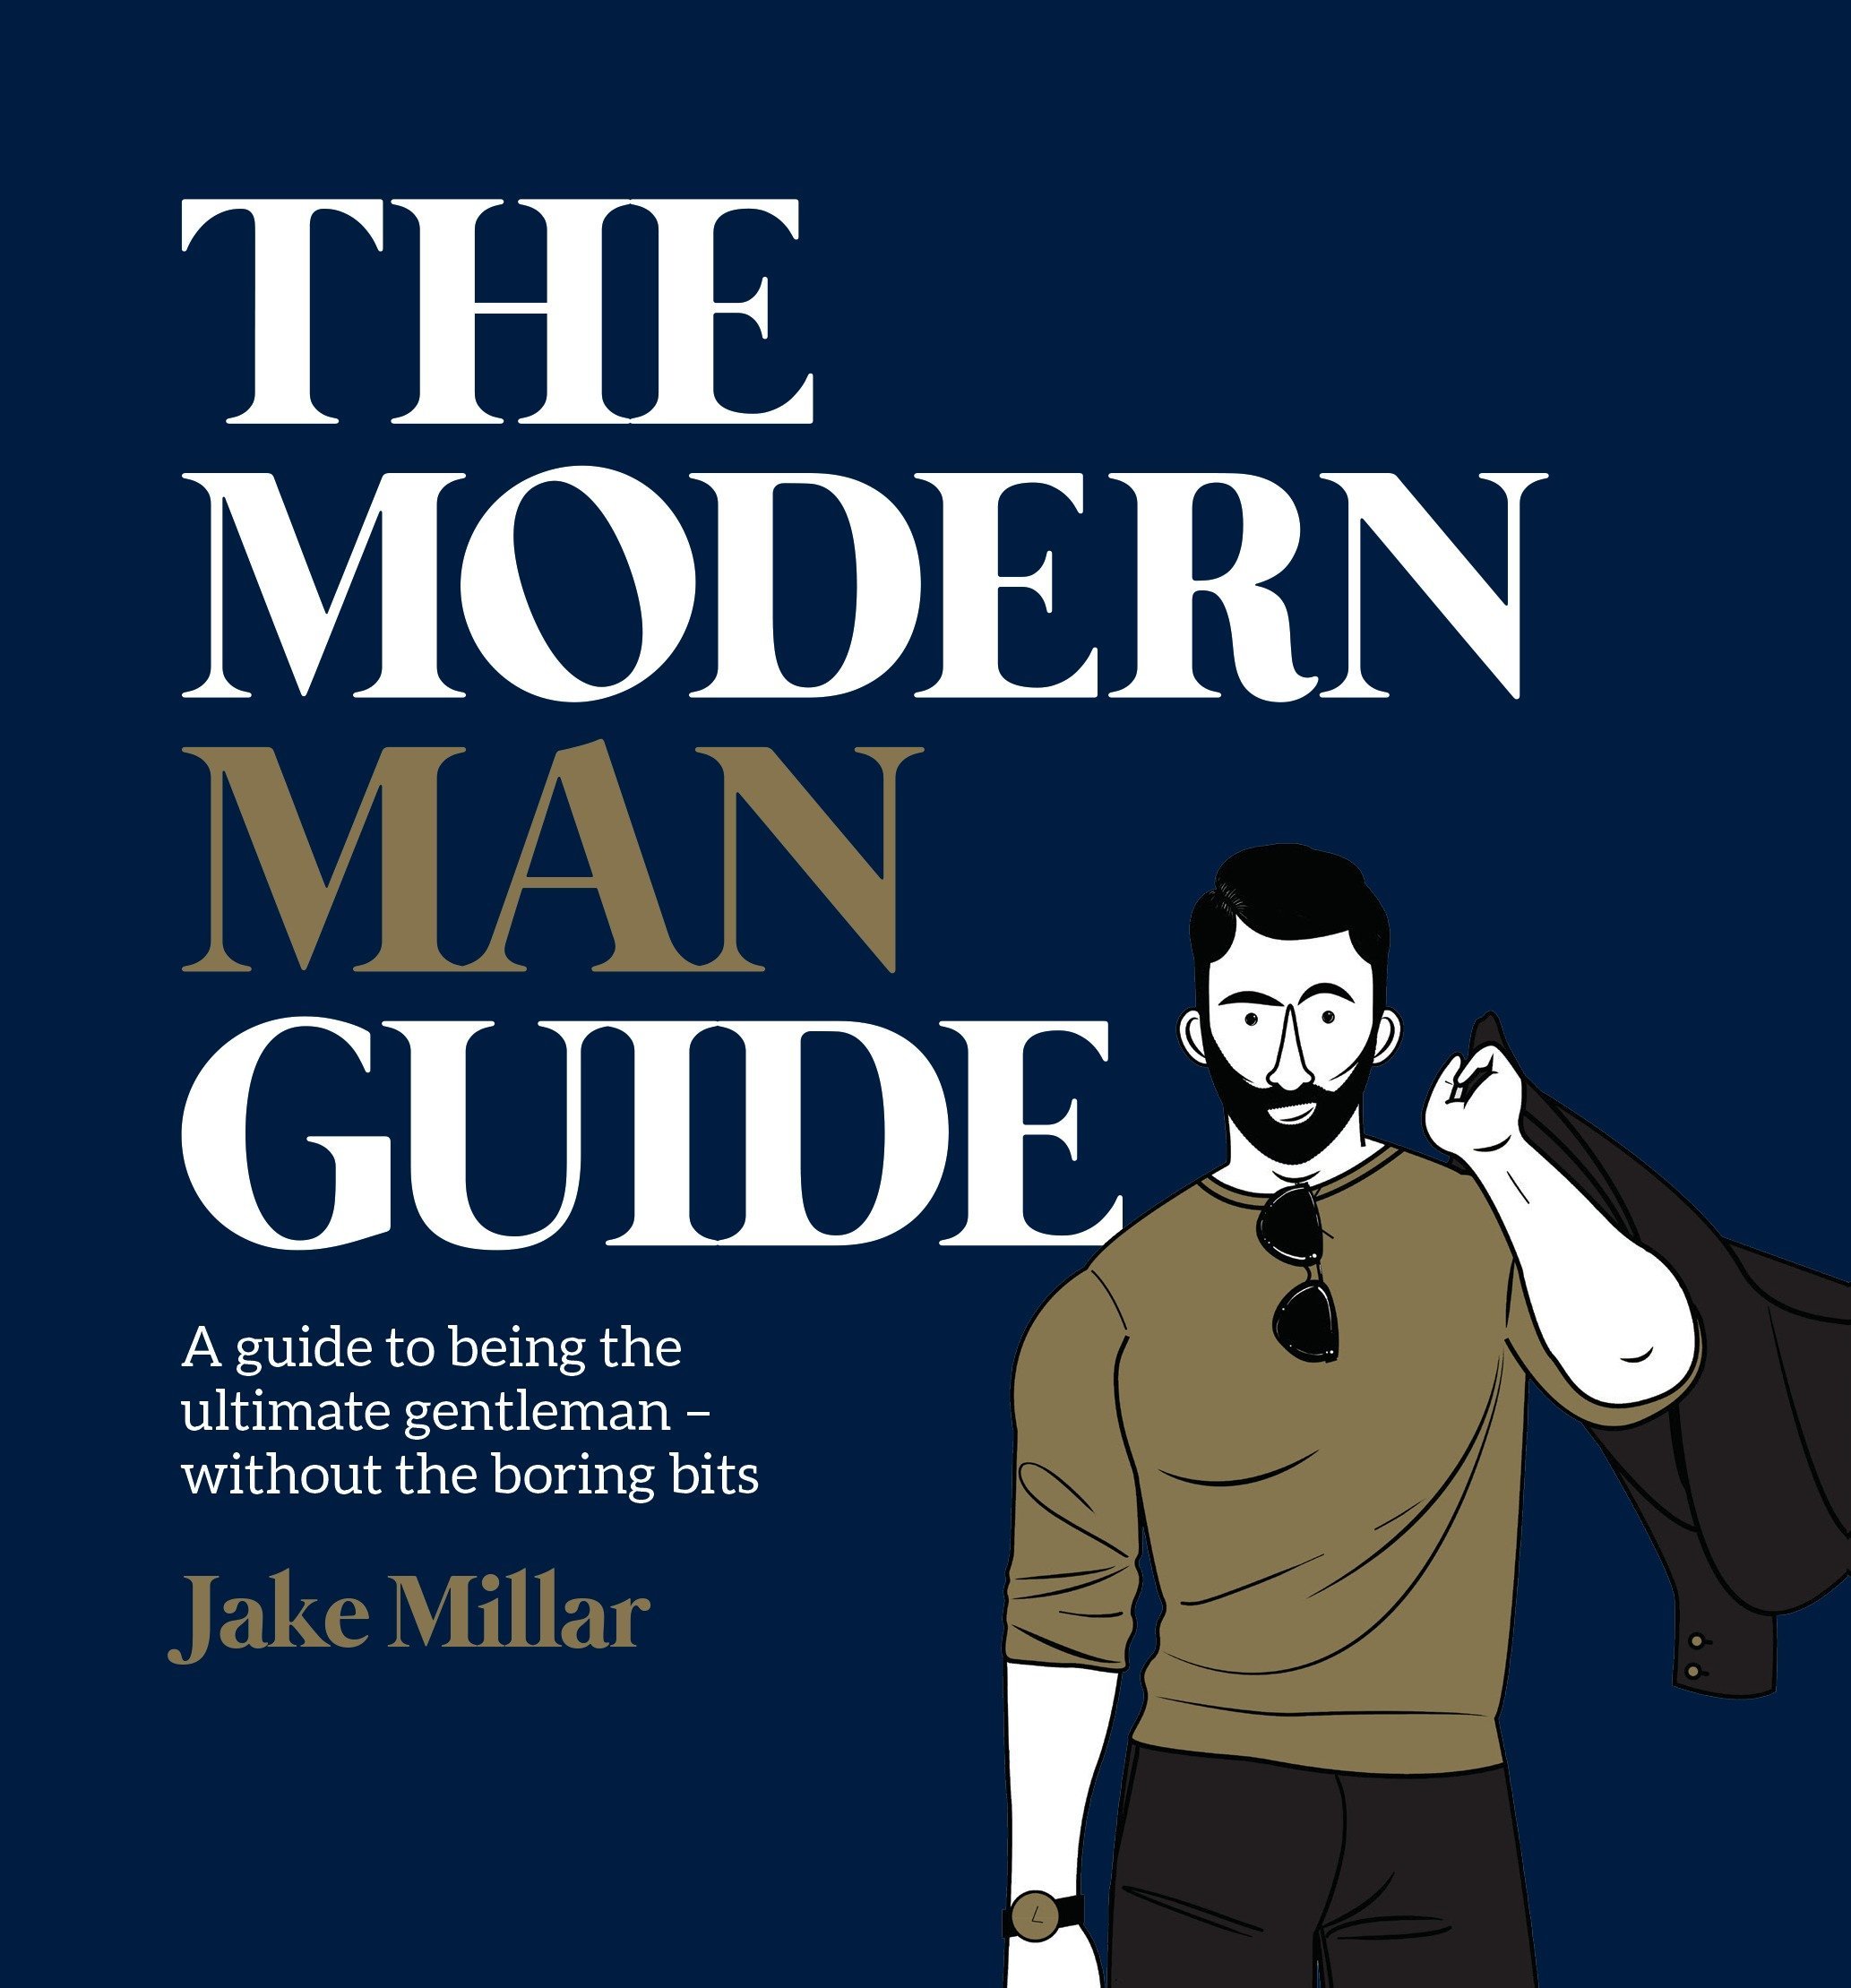 The Modern Man Guide: A cheat's guide to being the ultimate gentleman | Jake Millar